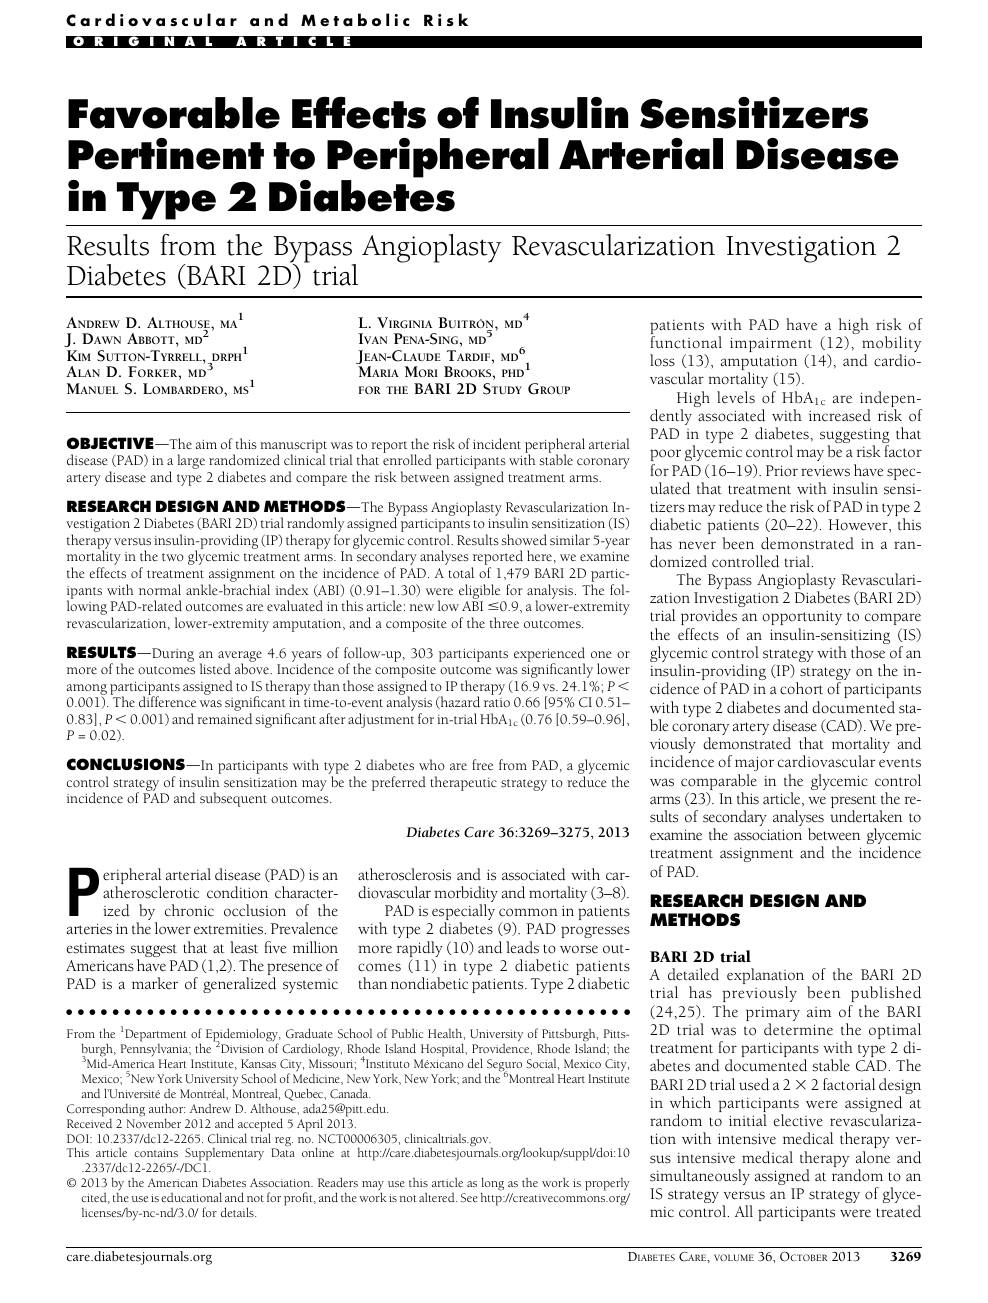 Favorable Effects Of Insulin Sensitizers Pertinent To Peripheral Arterial Disease In Type 2 Diabetes Results From The Bypass Angioplasty Revascularization Investigation 2 Diabetes Bari 2d Trial Topic Of Research Paper In